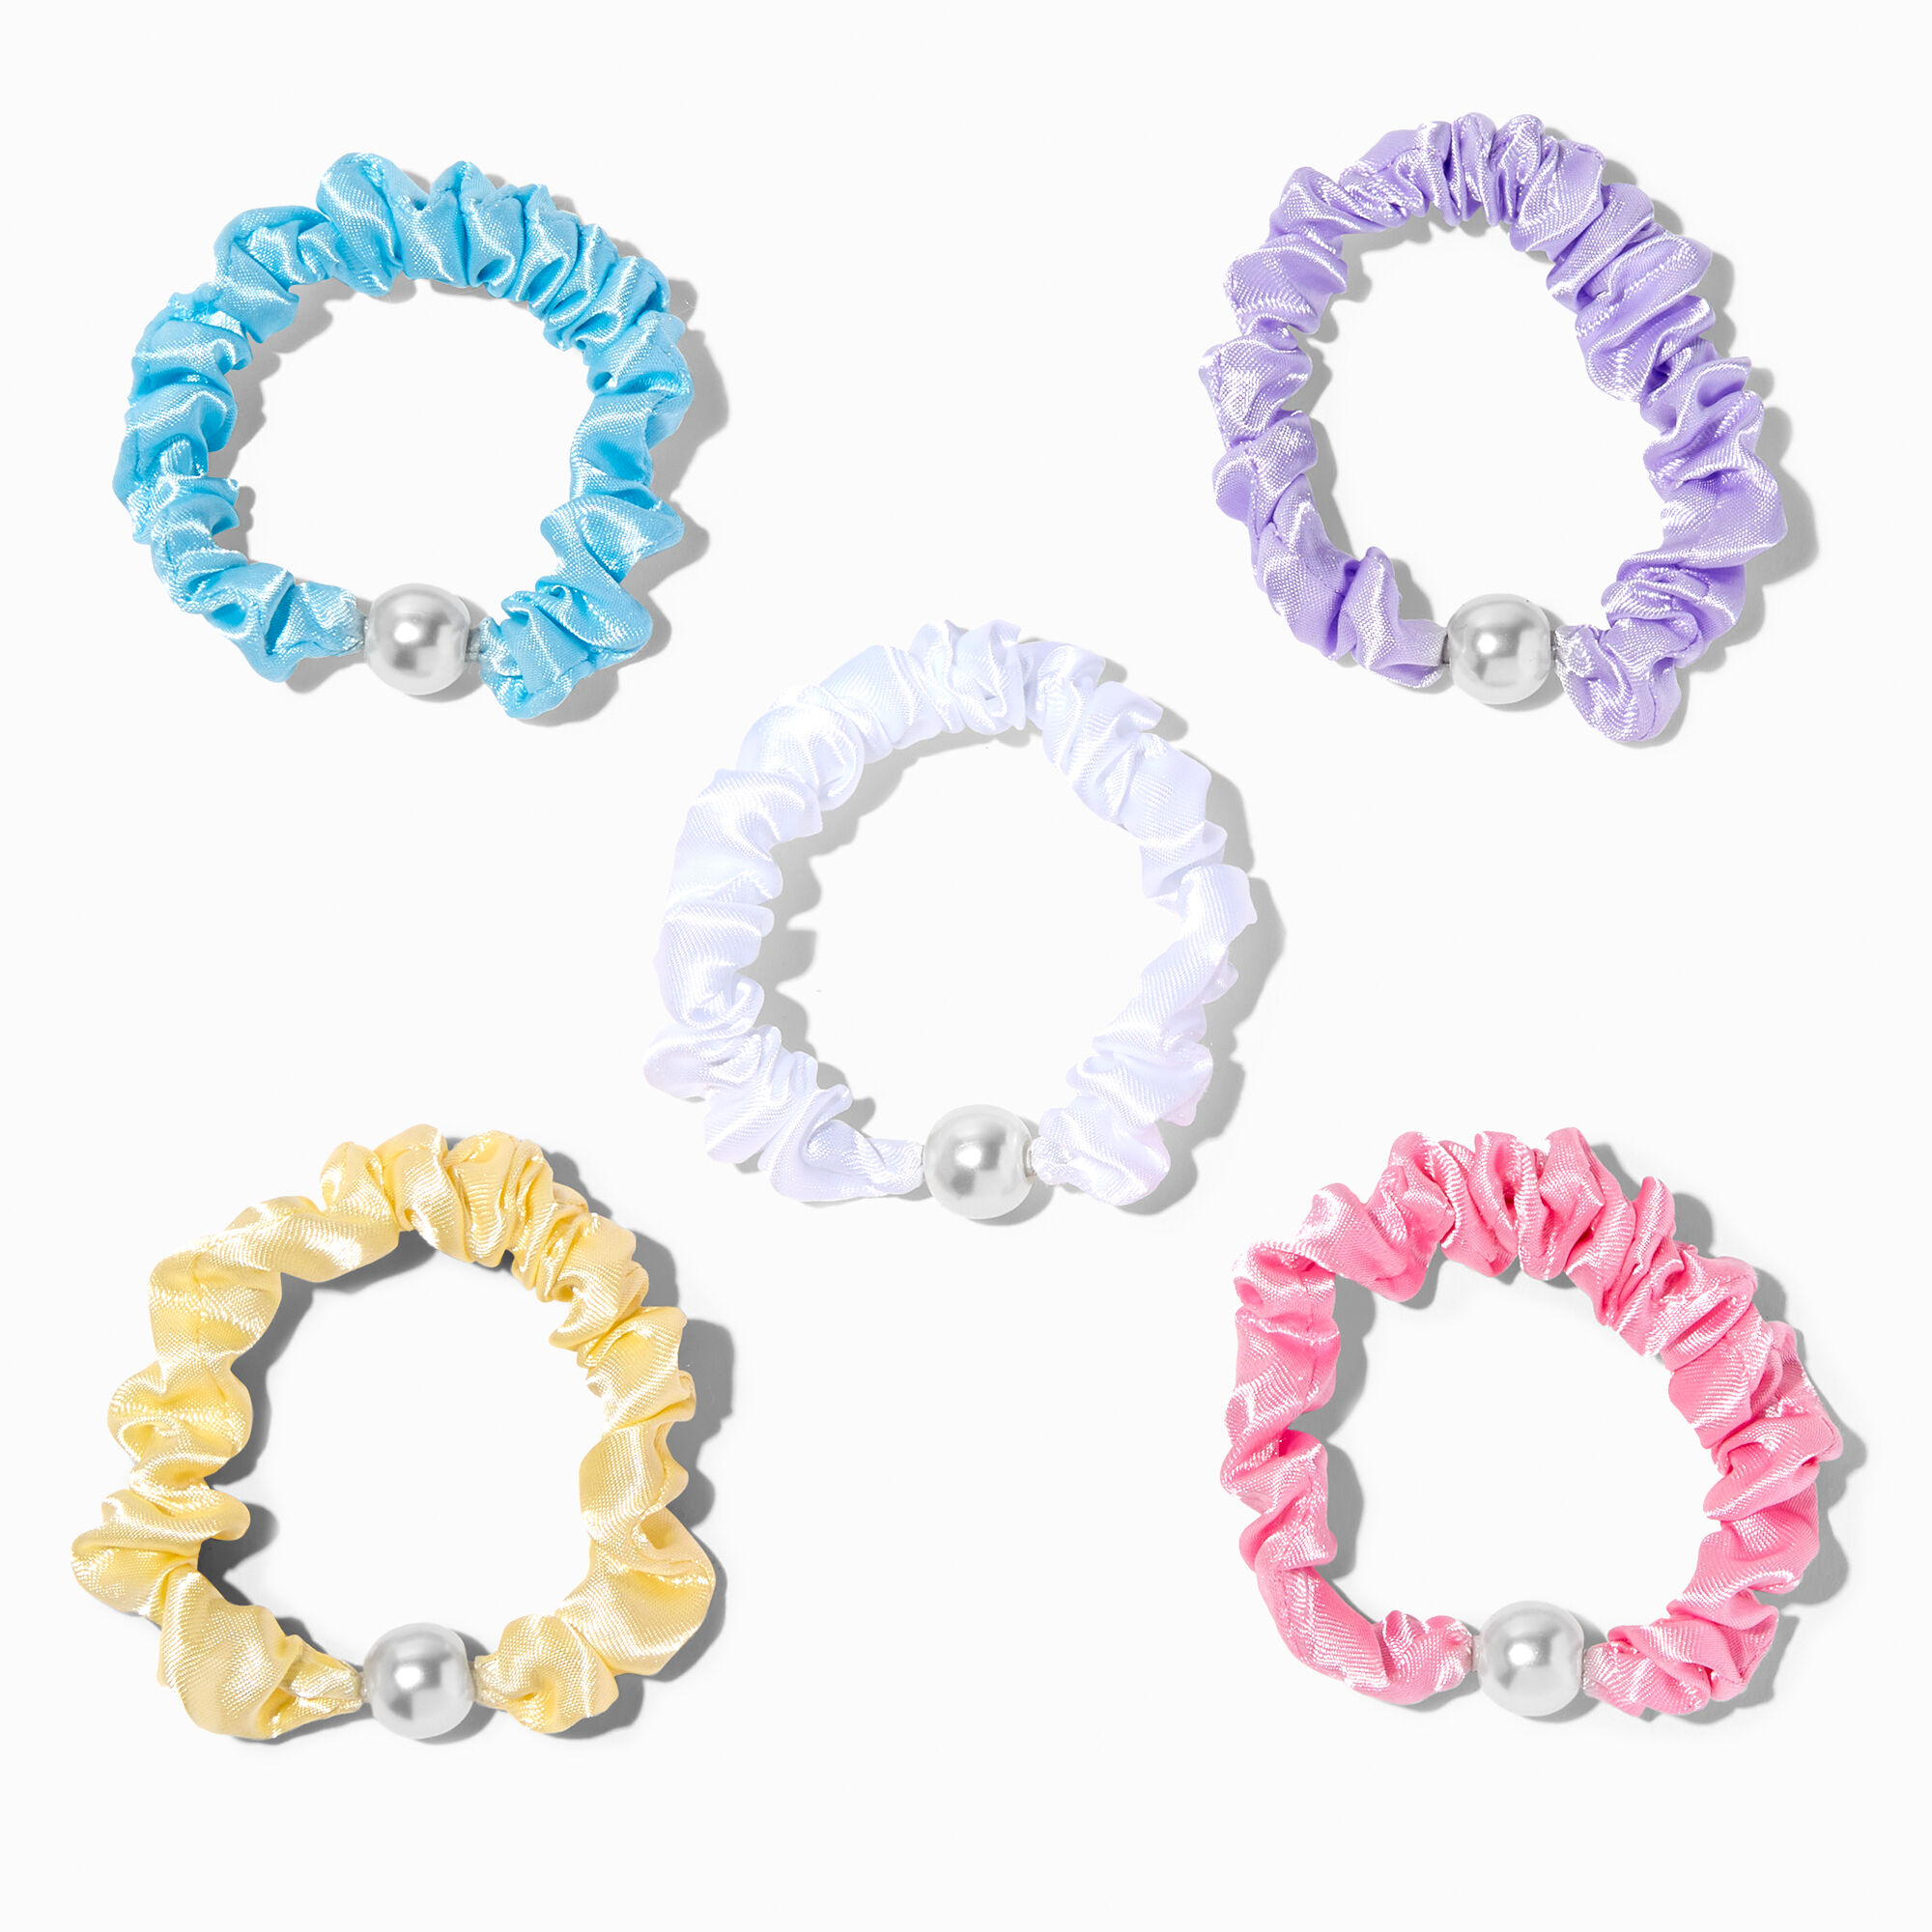 View Claires Club Small Pastel Silky Pearl Hair Scrunchies 5 Pack Bracelet information